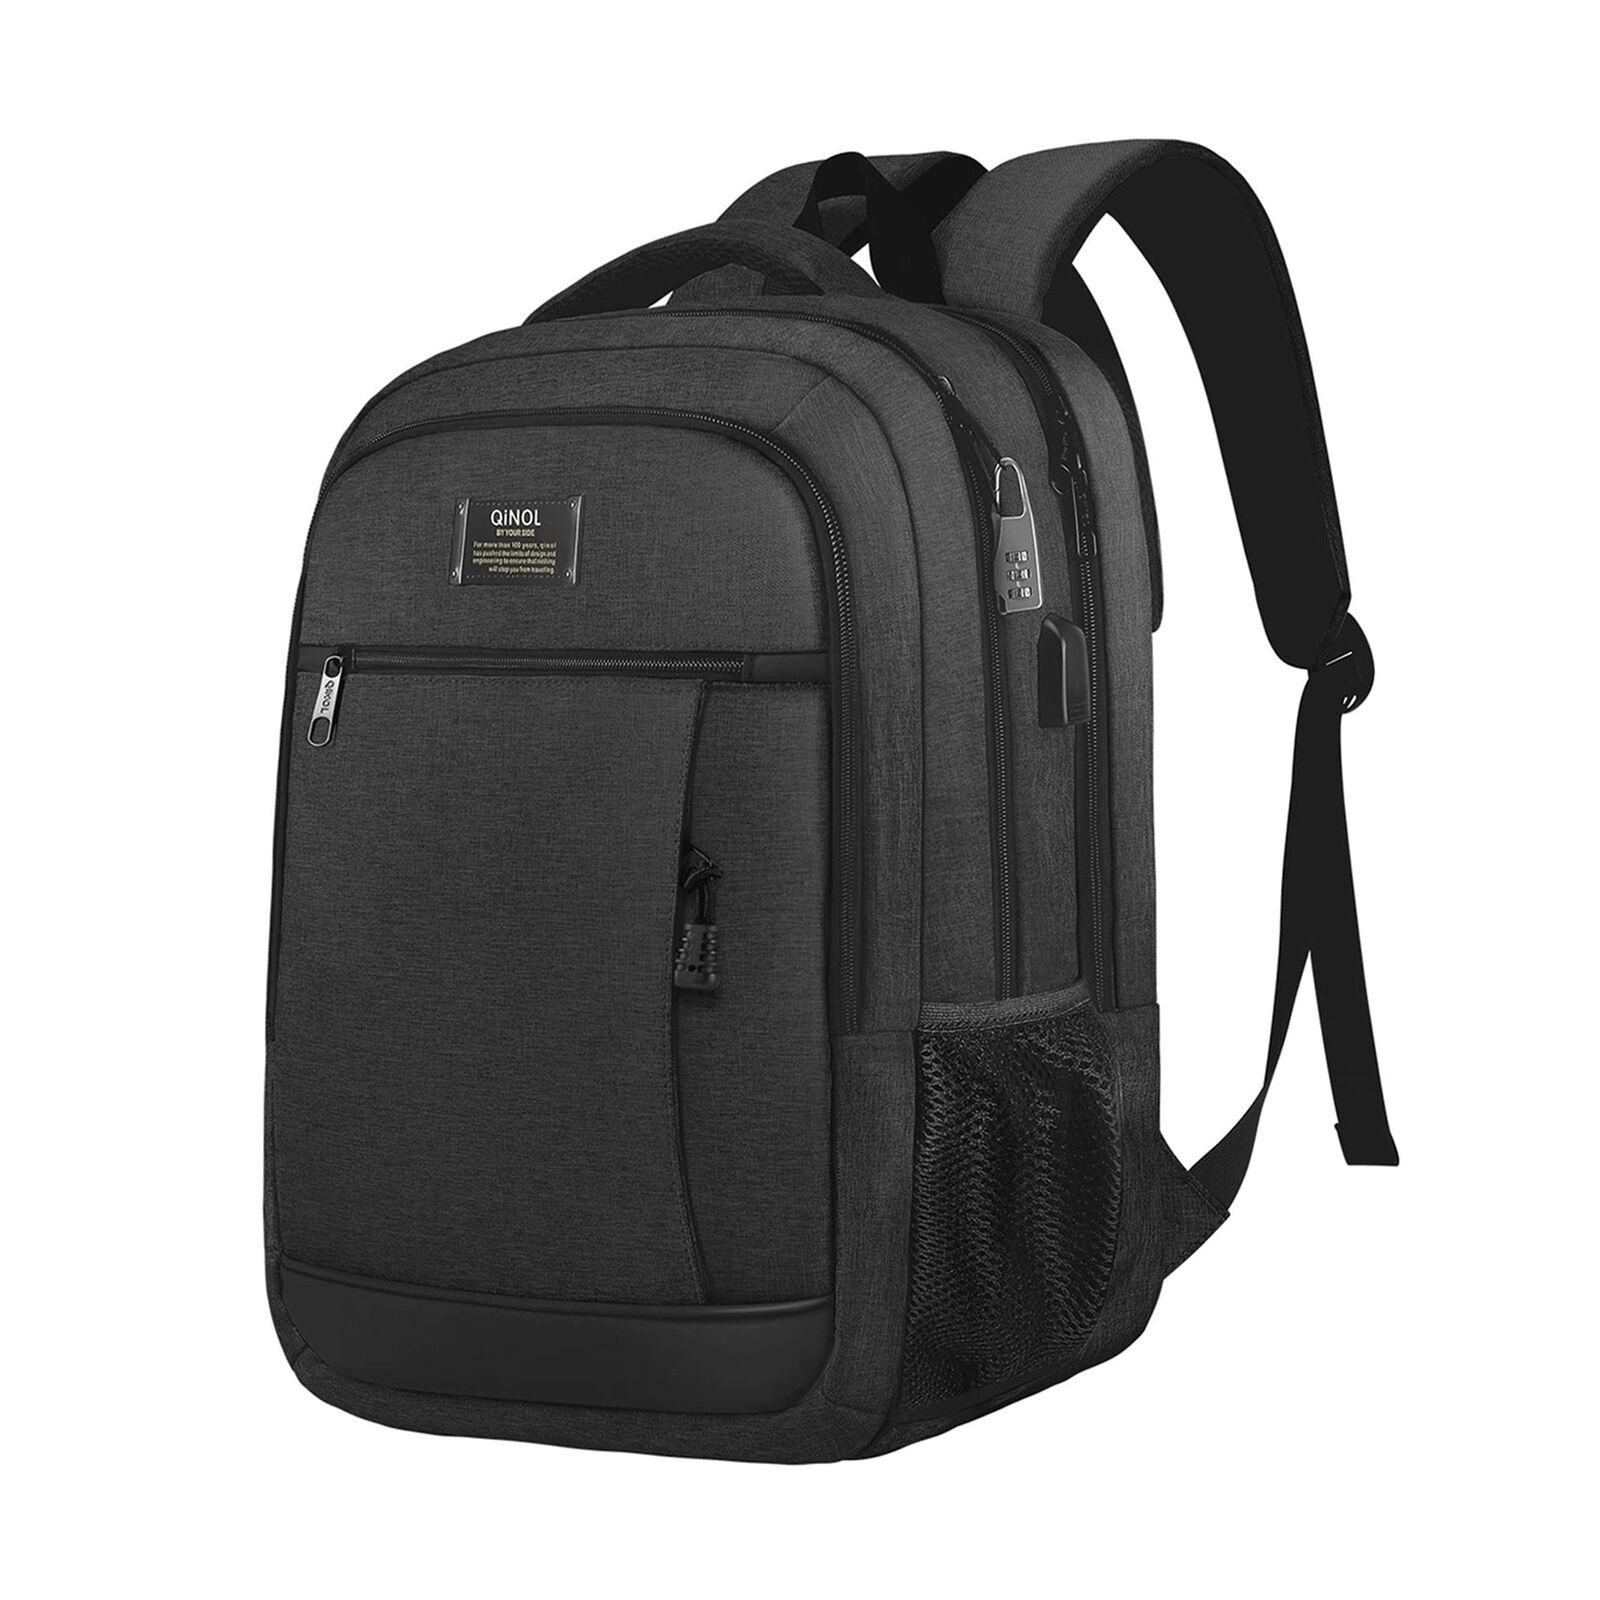 QINOL Travel Laptop Backpack, Business Anti Theft Durable Laptop Backpack wit...